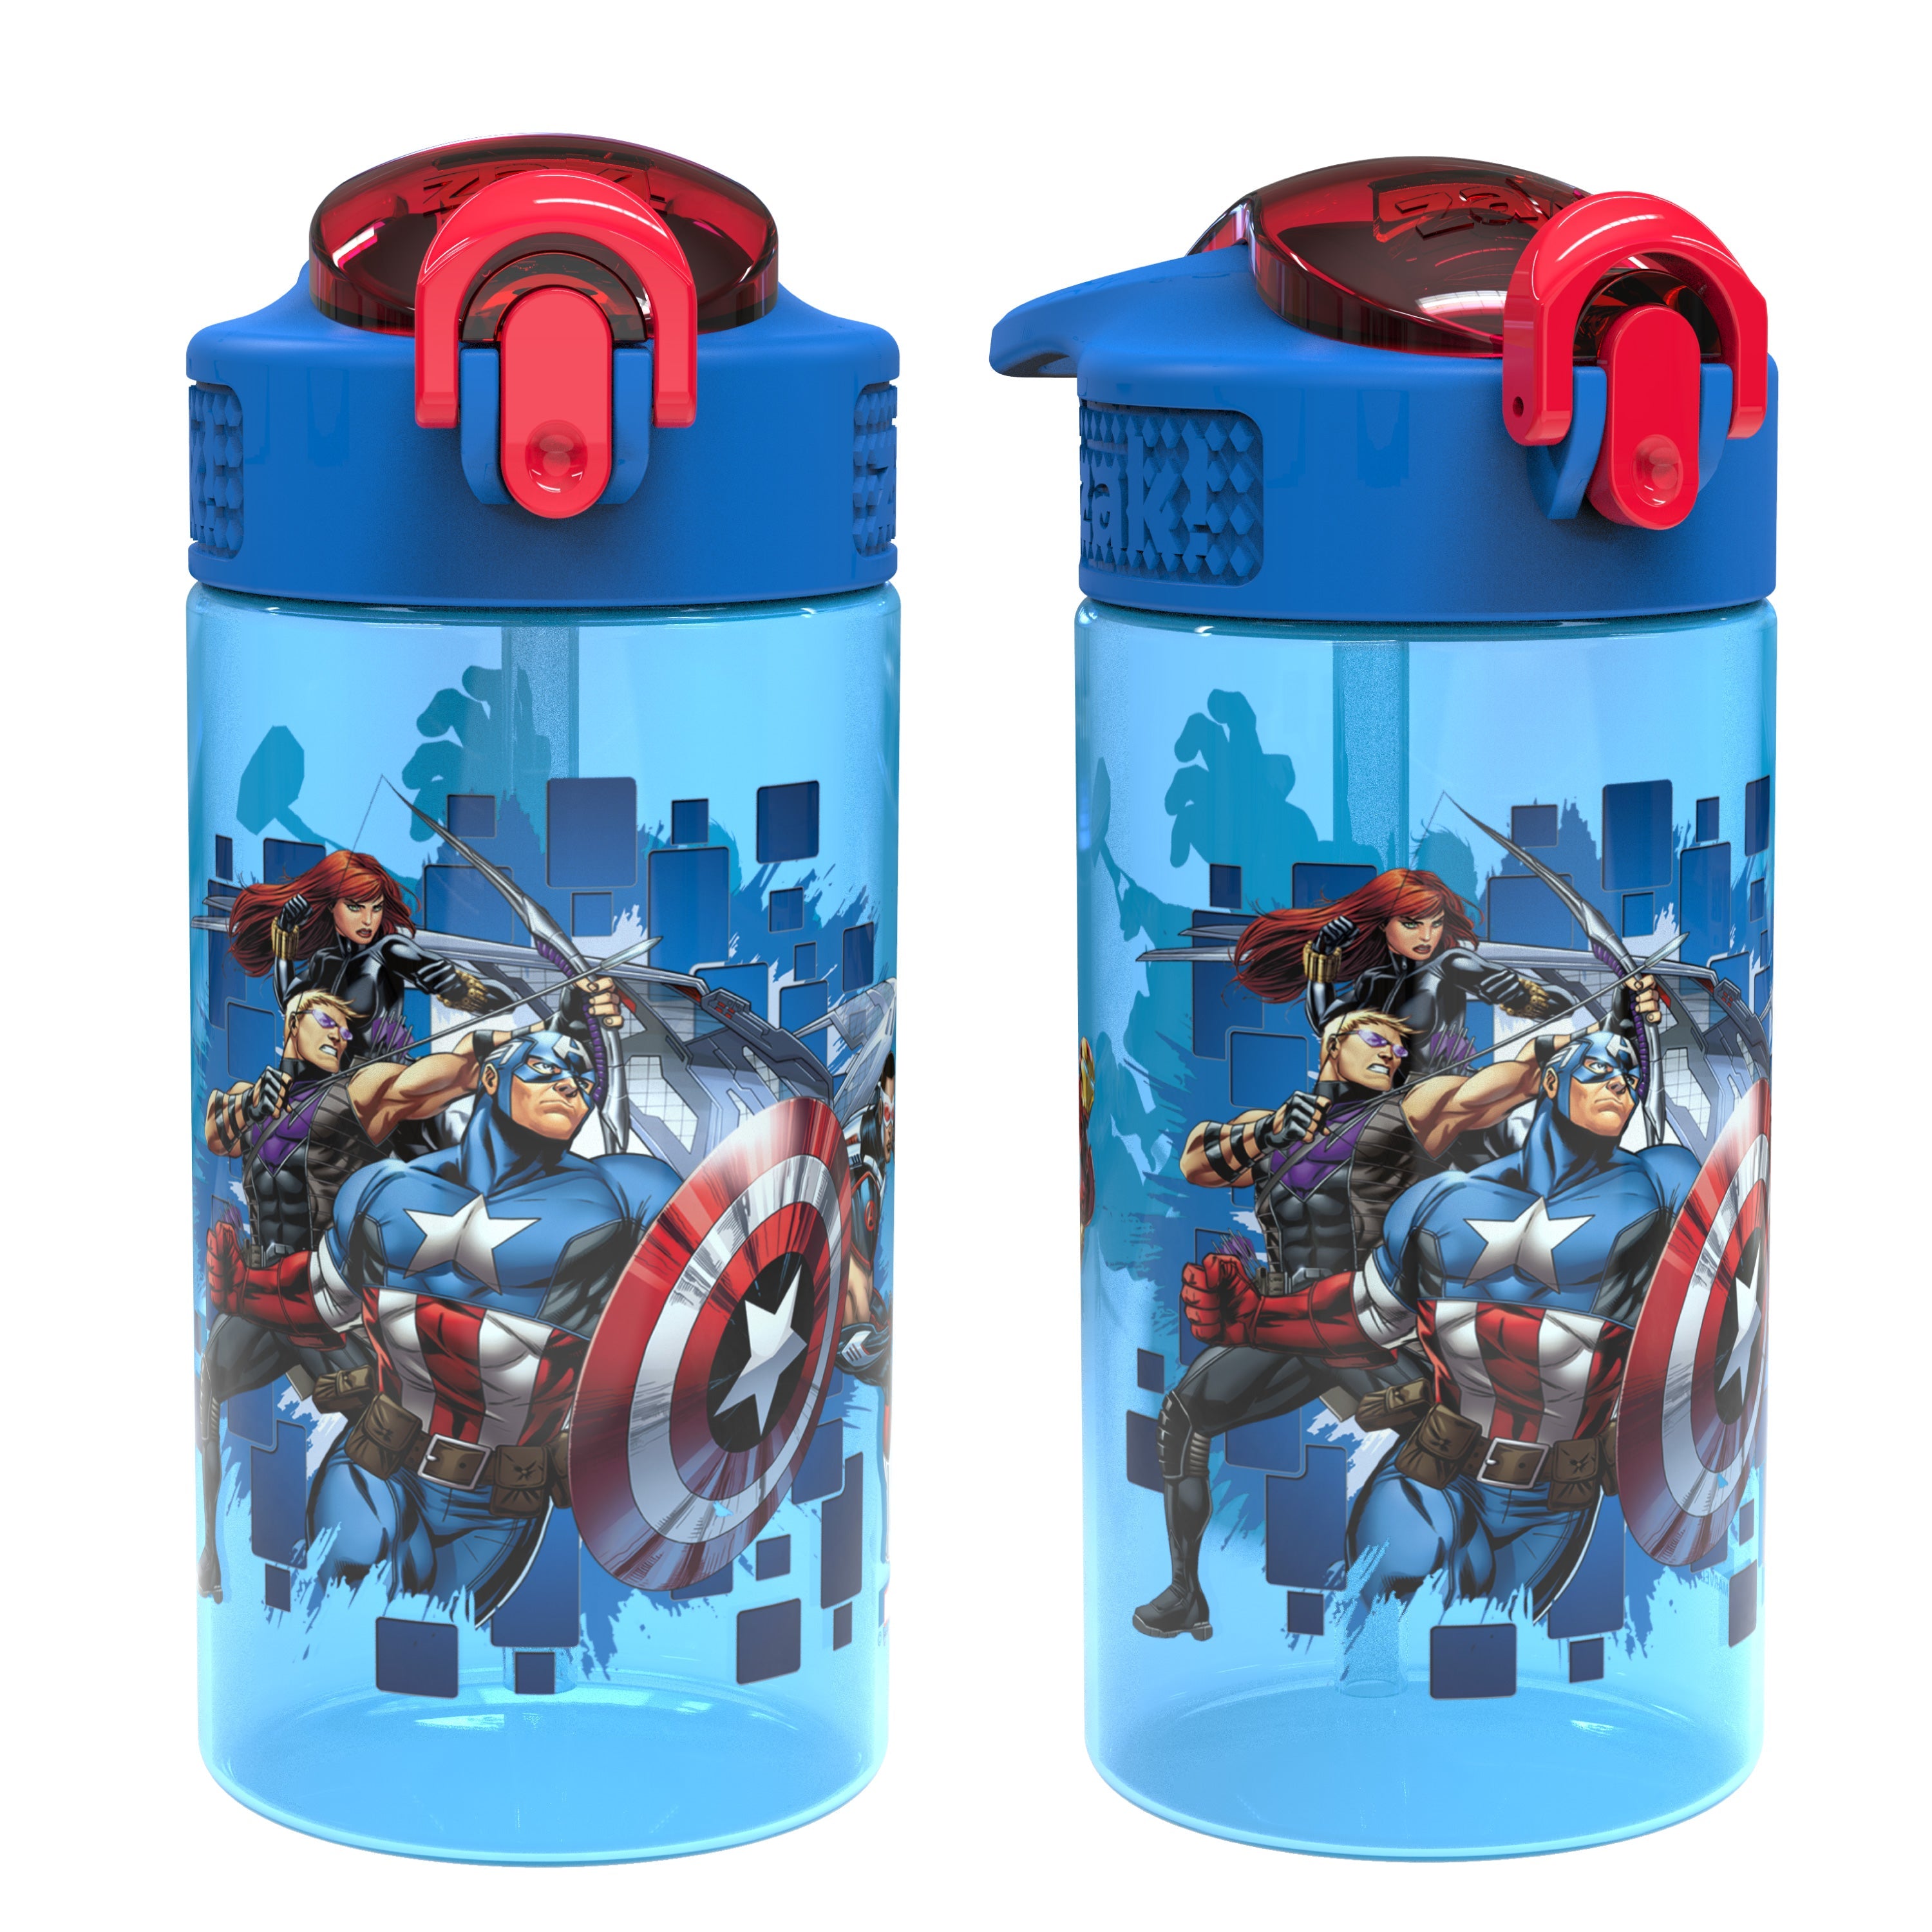 Marvel Avengers Kids Plastic Water Bottle with Leak Proof Lid and Spout - 2 Pack, 16 ounce